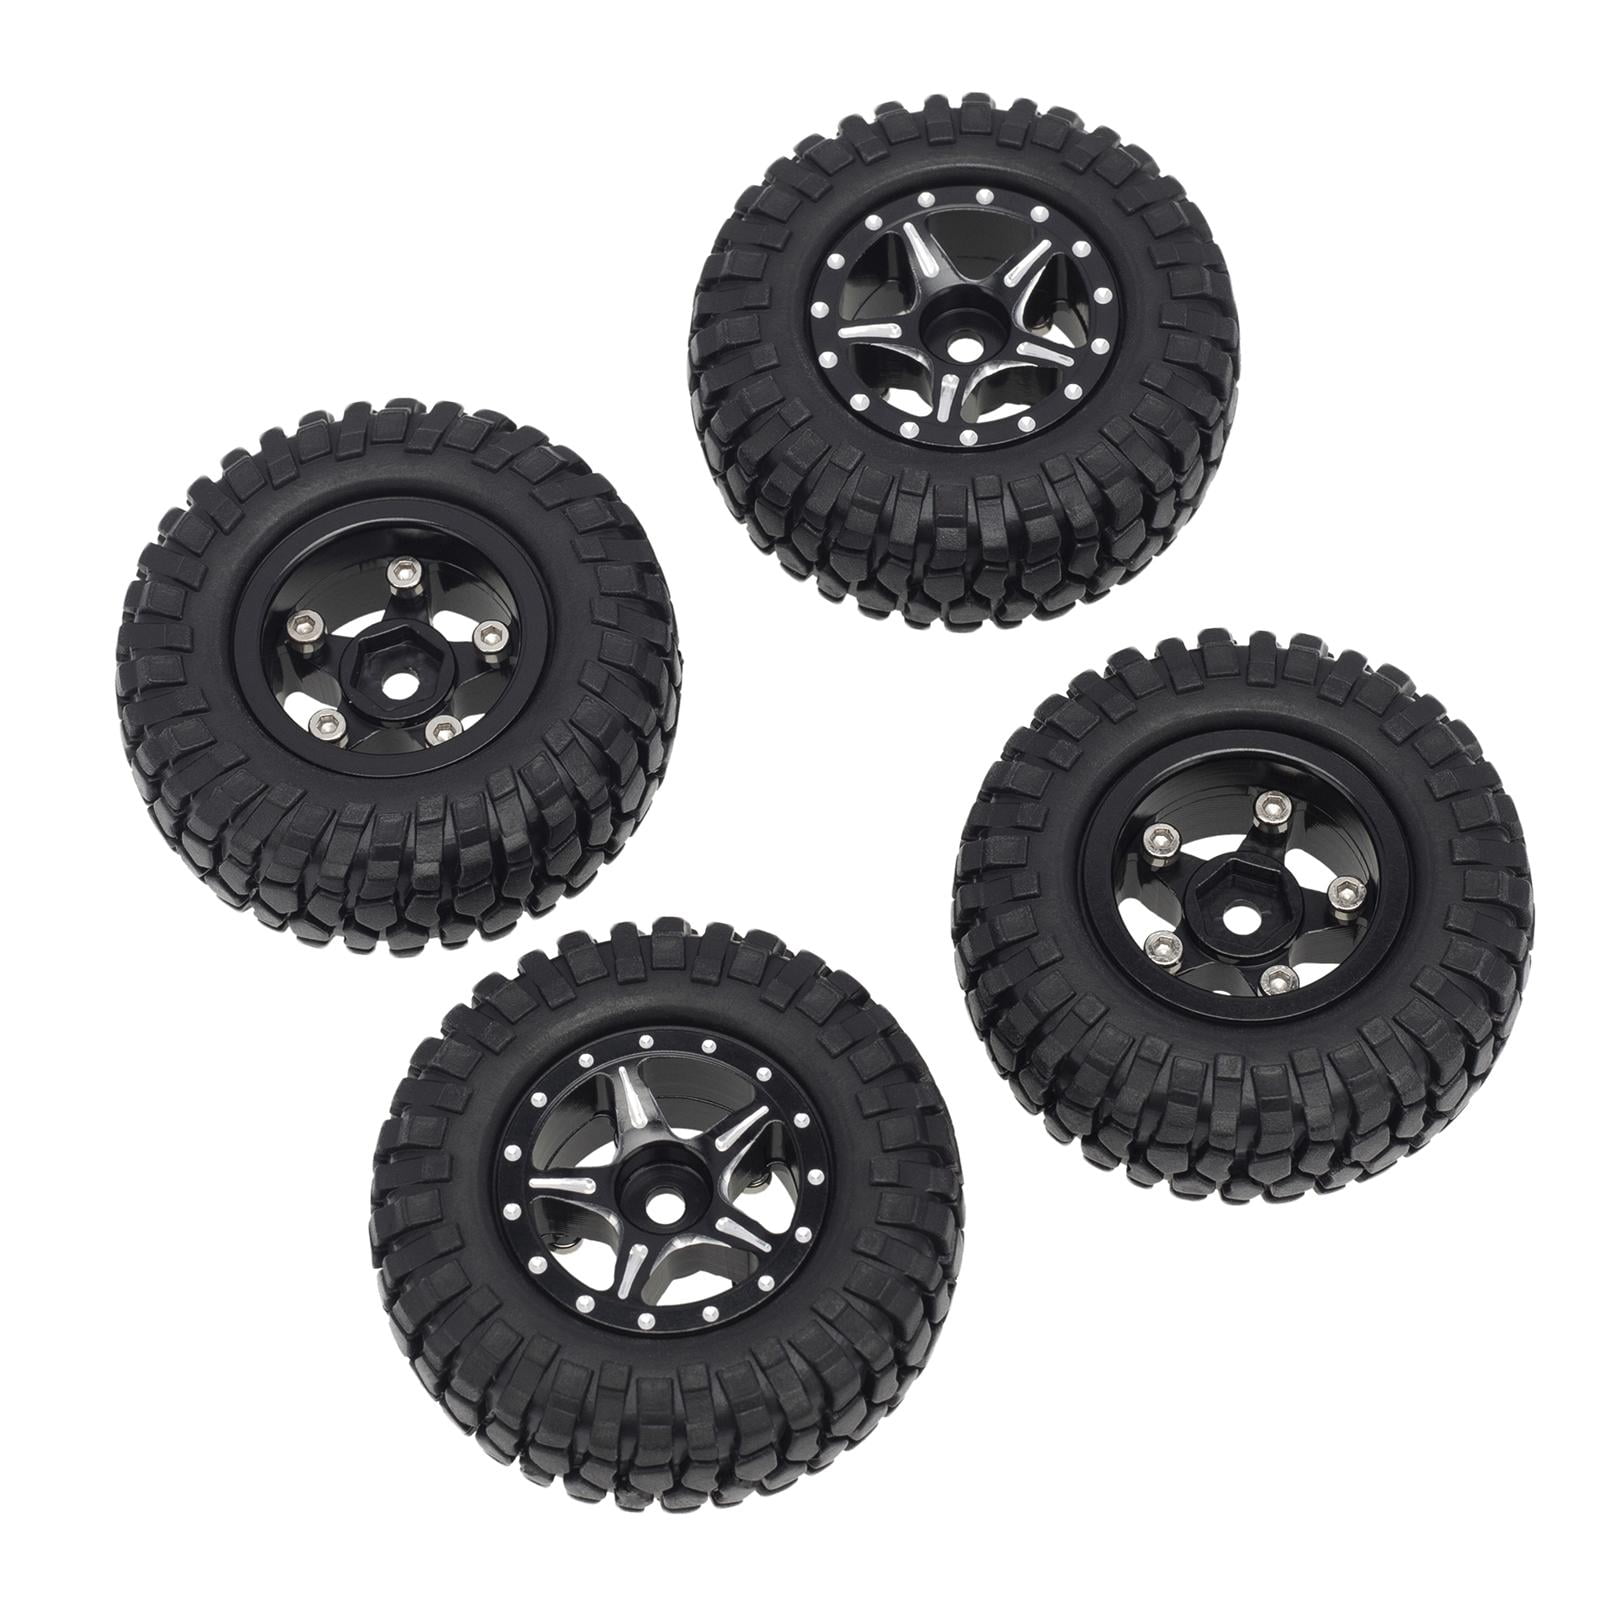 Black Hobby Custom Replacement Wheels Set of 6 Fits most 1/24 Scale Model Car 